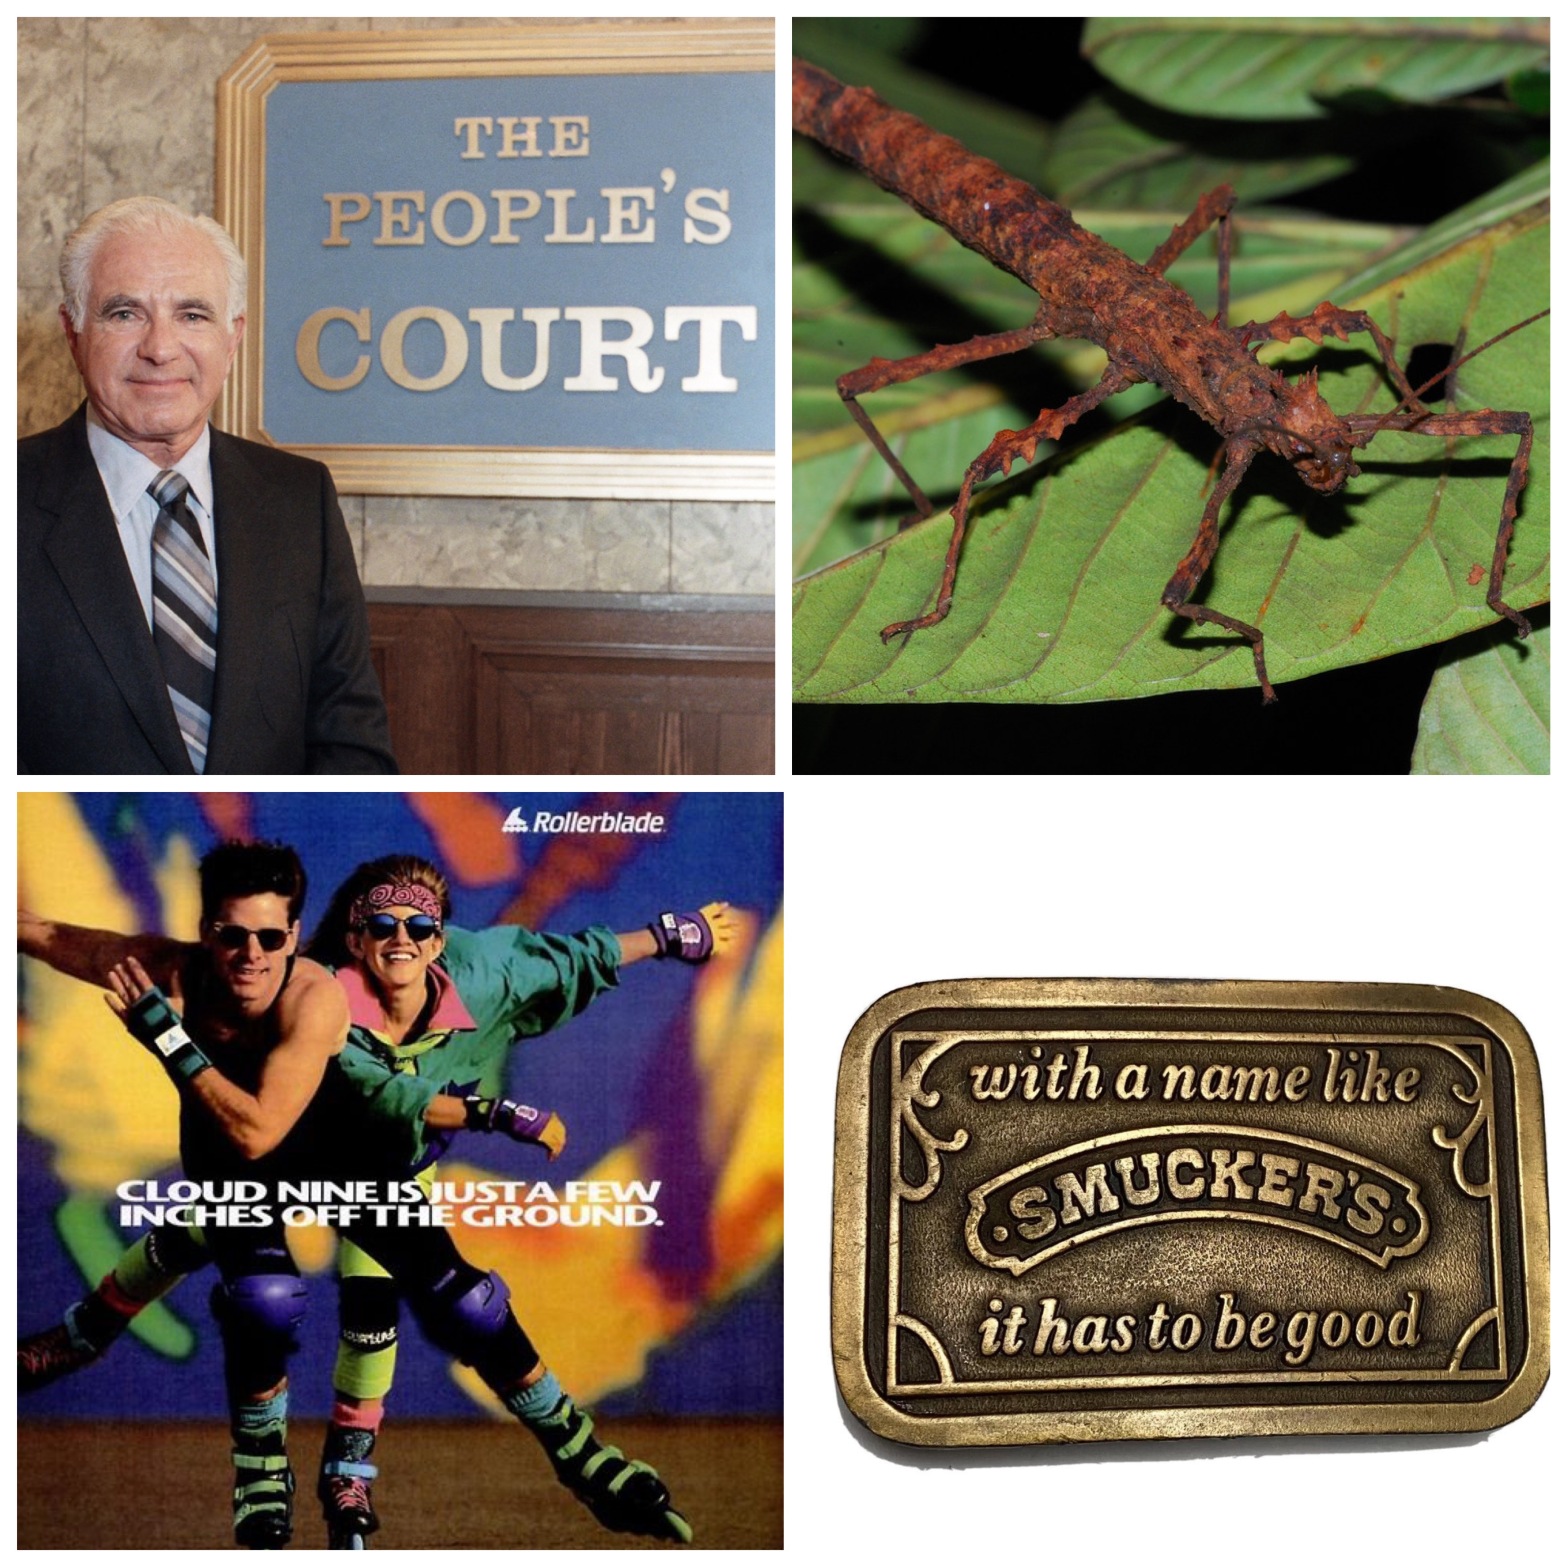 Judge Wapner standing with The People's Court logo. A creoxylus spinosus. A 90s ad for rollerblades reading Cloud Nine Is Just A Few Inches Off The Ground. A belt buckle stamped with the slogan "with a name like Smucker's, it has to be good."